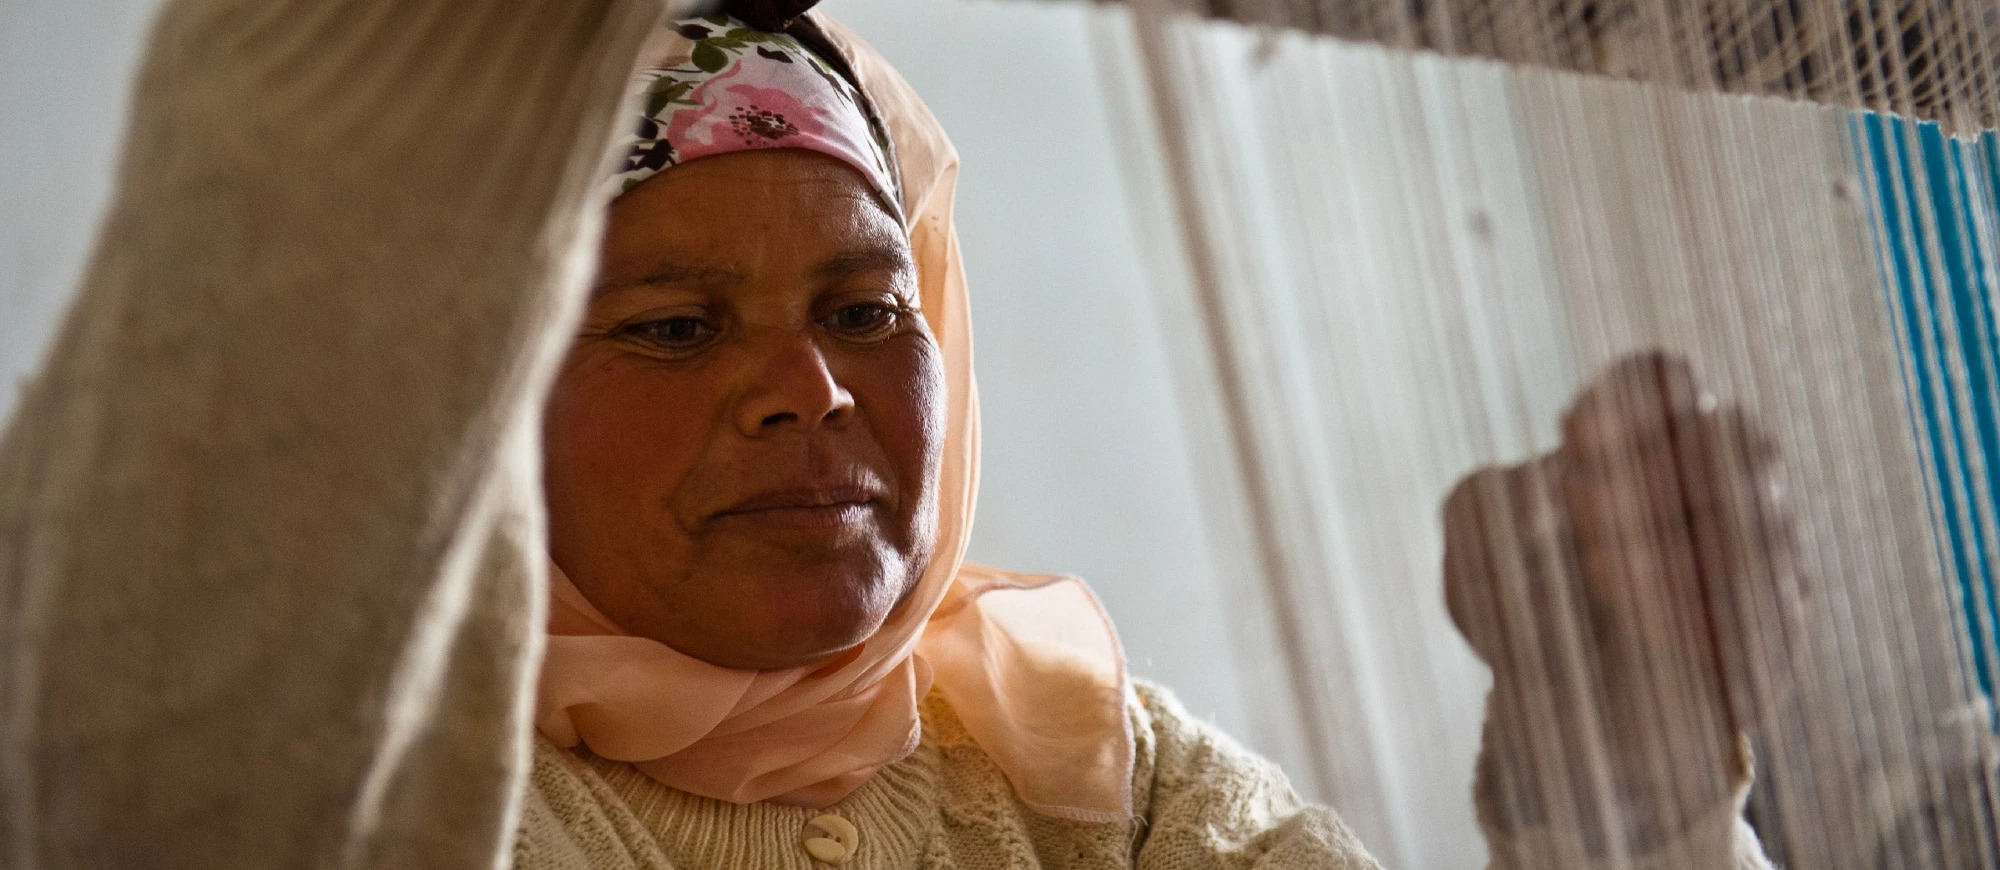 Gender gaps in the labor market are massive in Tunisia: in 2018, only 19% of working-age women versus 60% of working-age men were in paid- or self-employment. Photo: Arne Hoel / World Bank